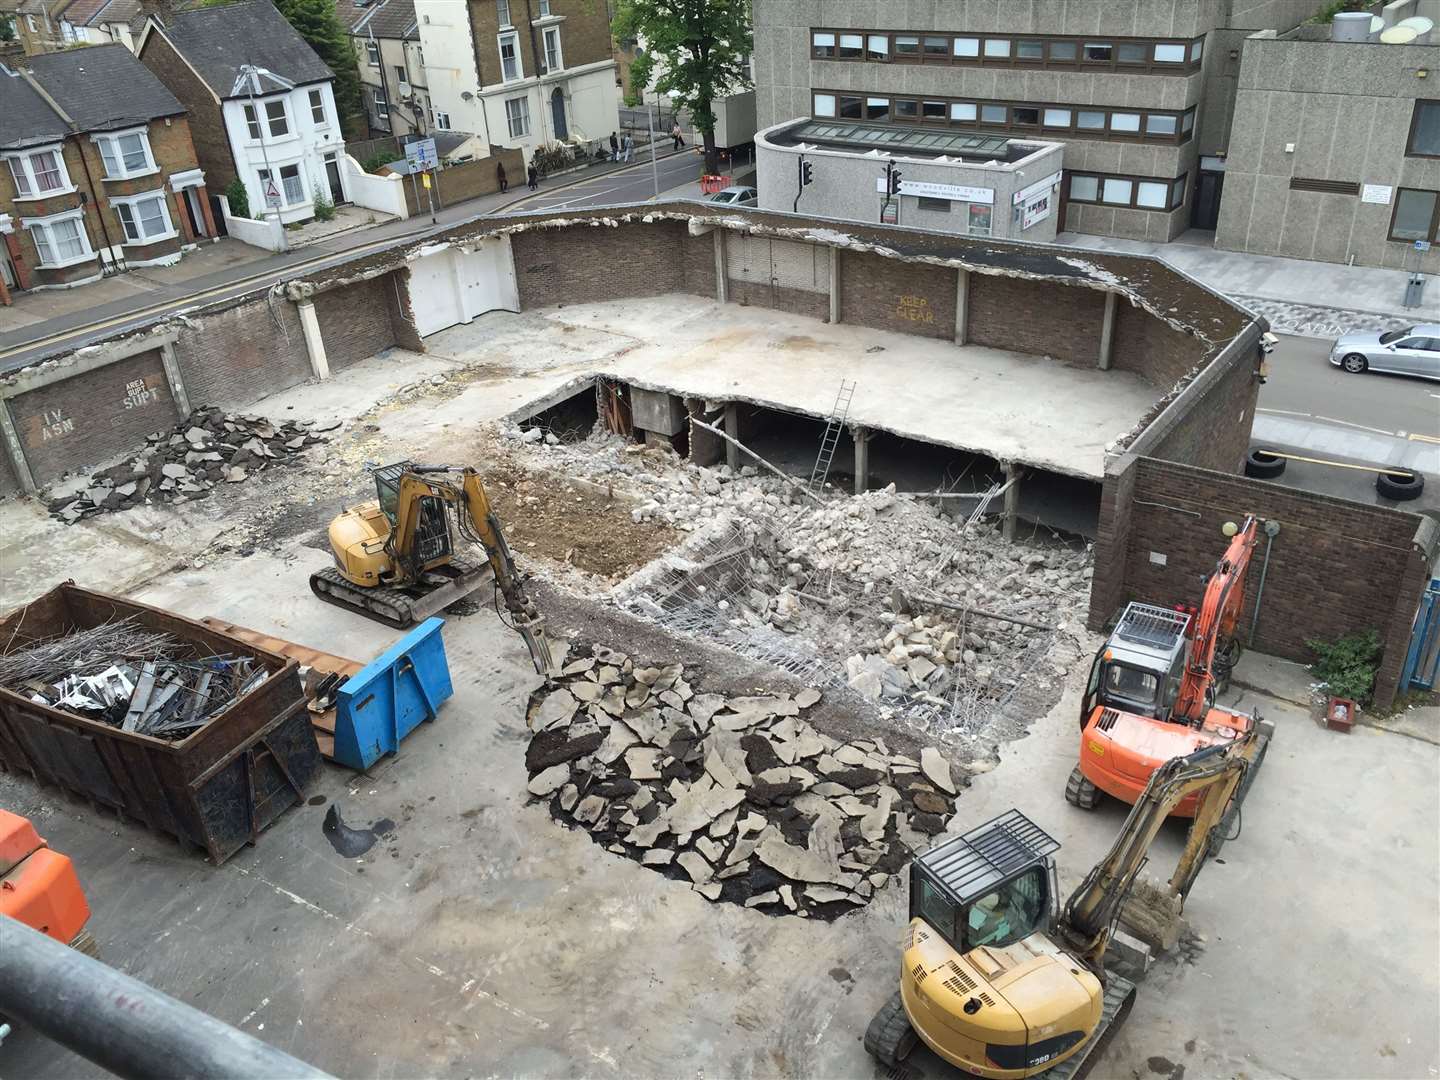 Gravesend Police Station was demolished in 2016